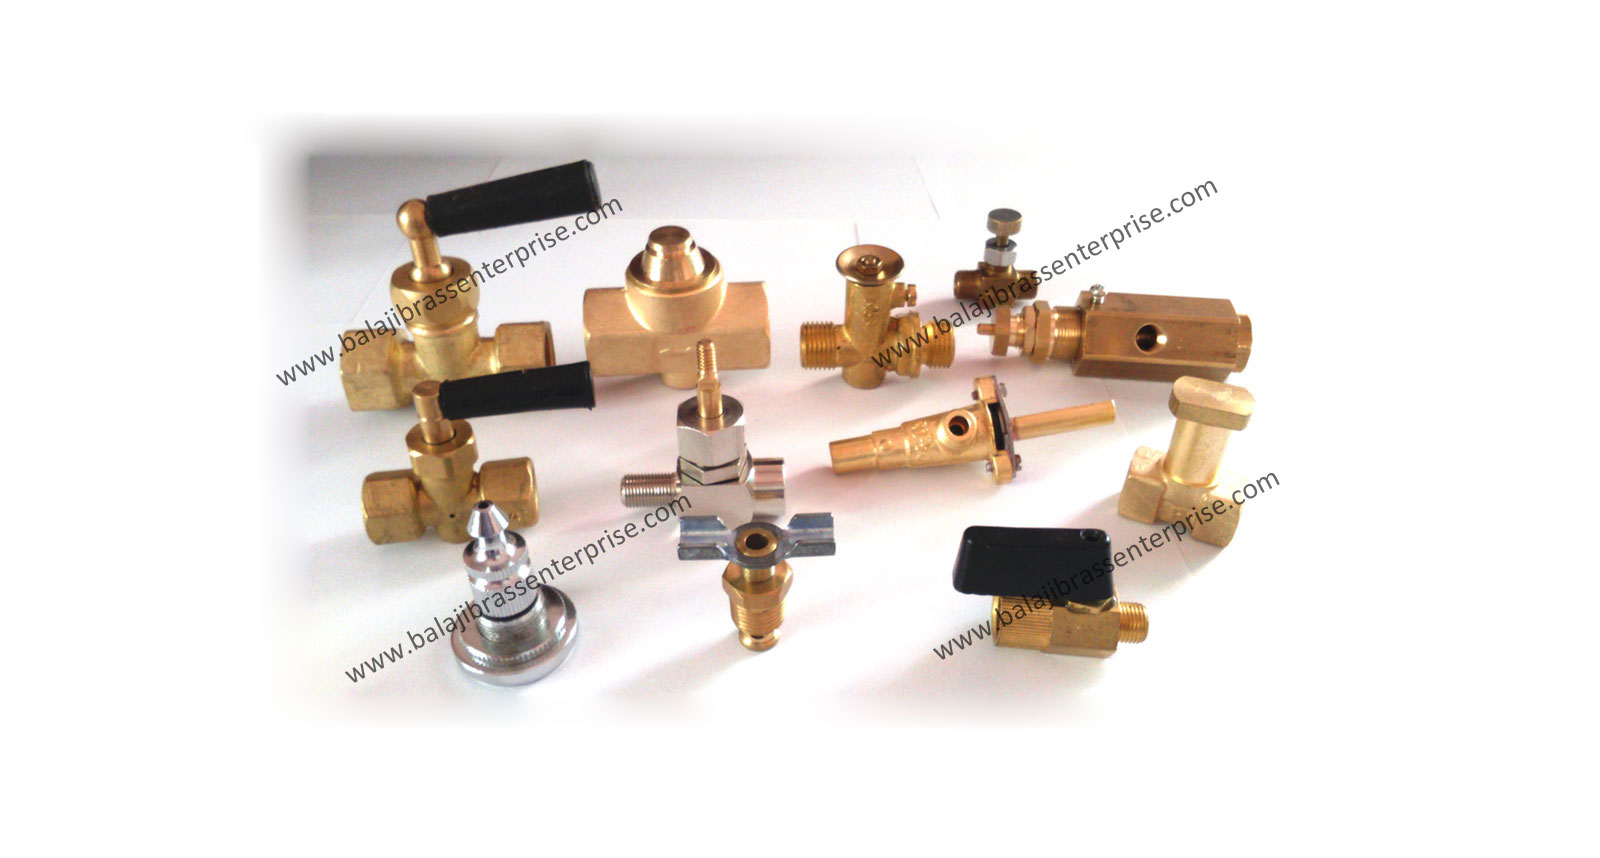 Brass Fitting Components